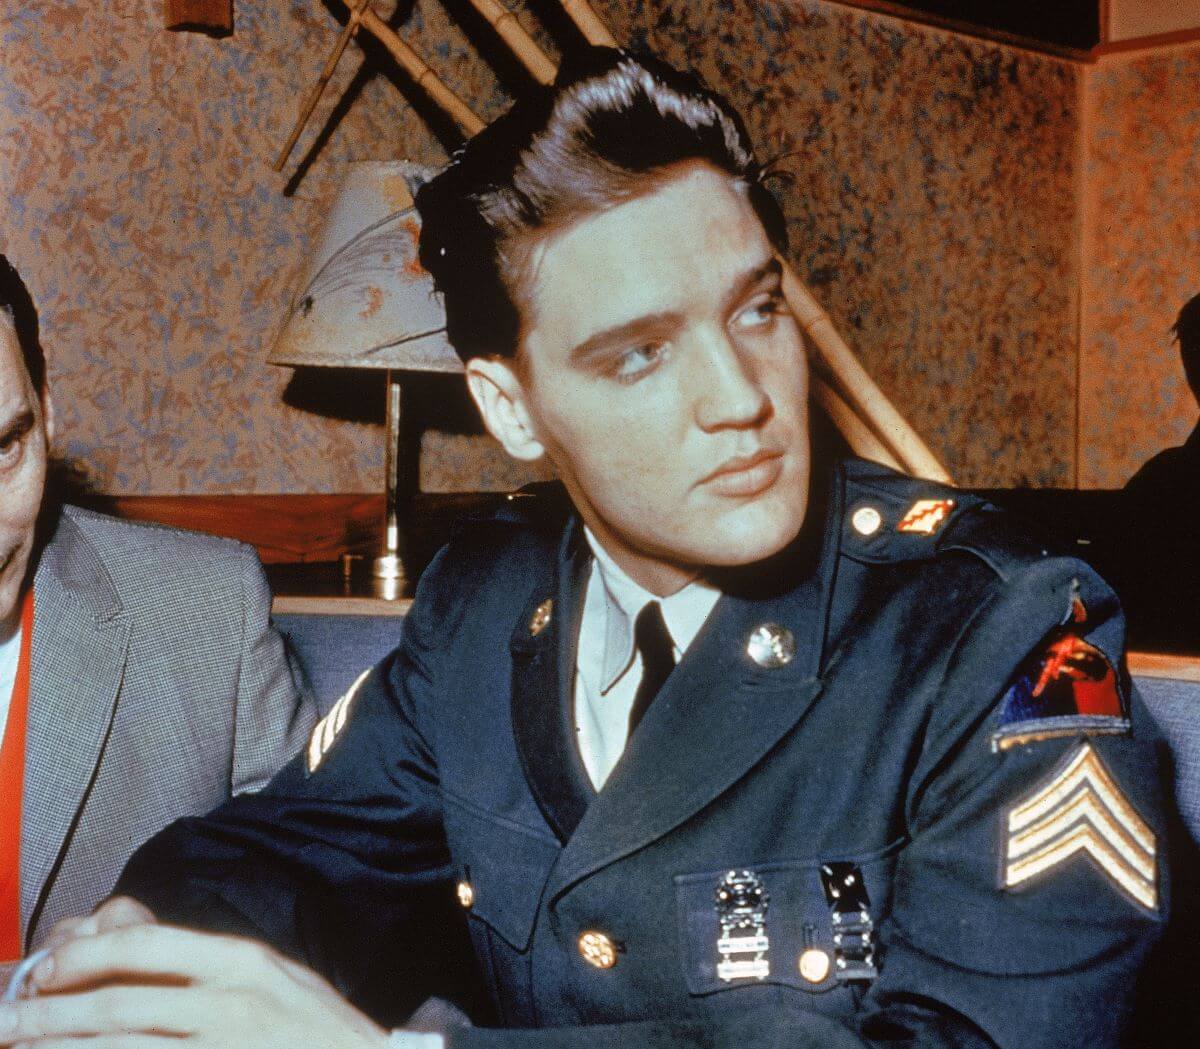 Elvis Presley wears his US Army uniform and sits in a booth.